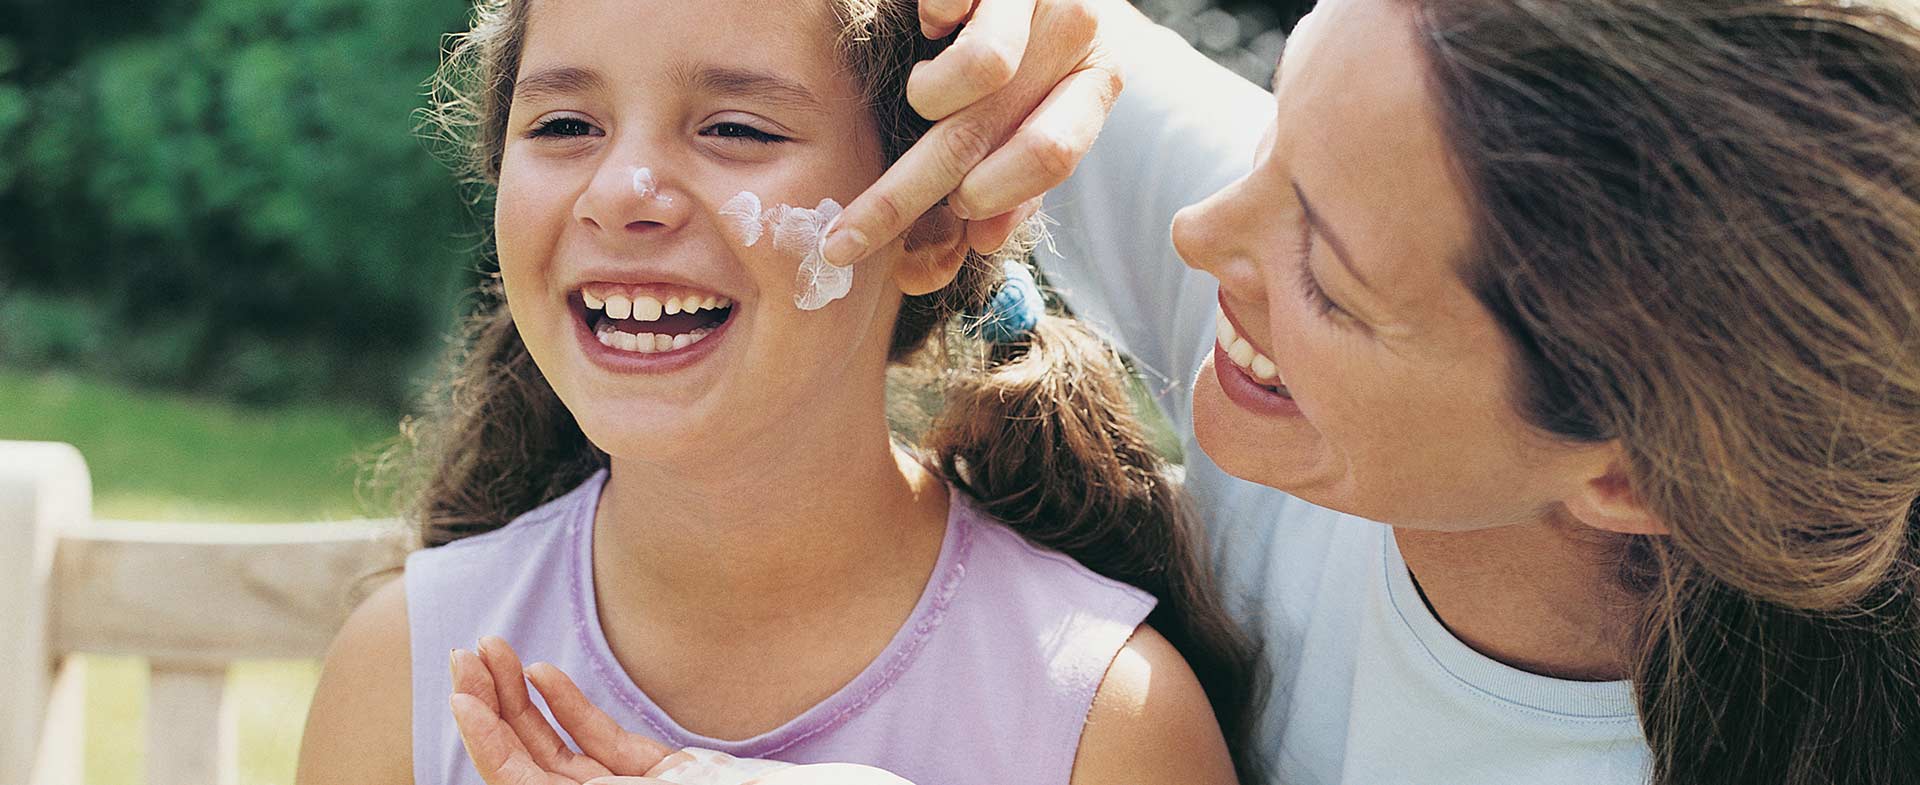 mother applying sunscreen to daughter